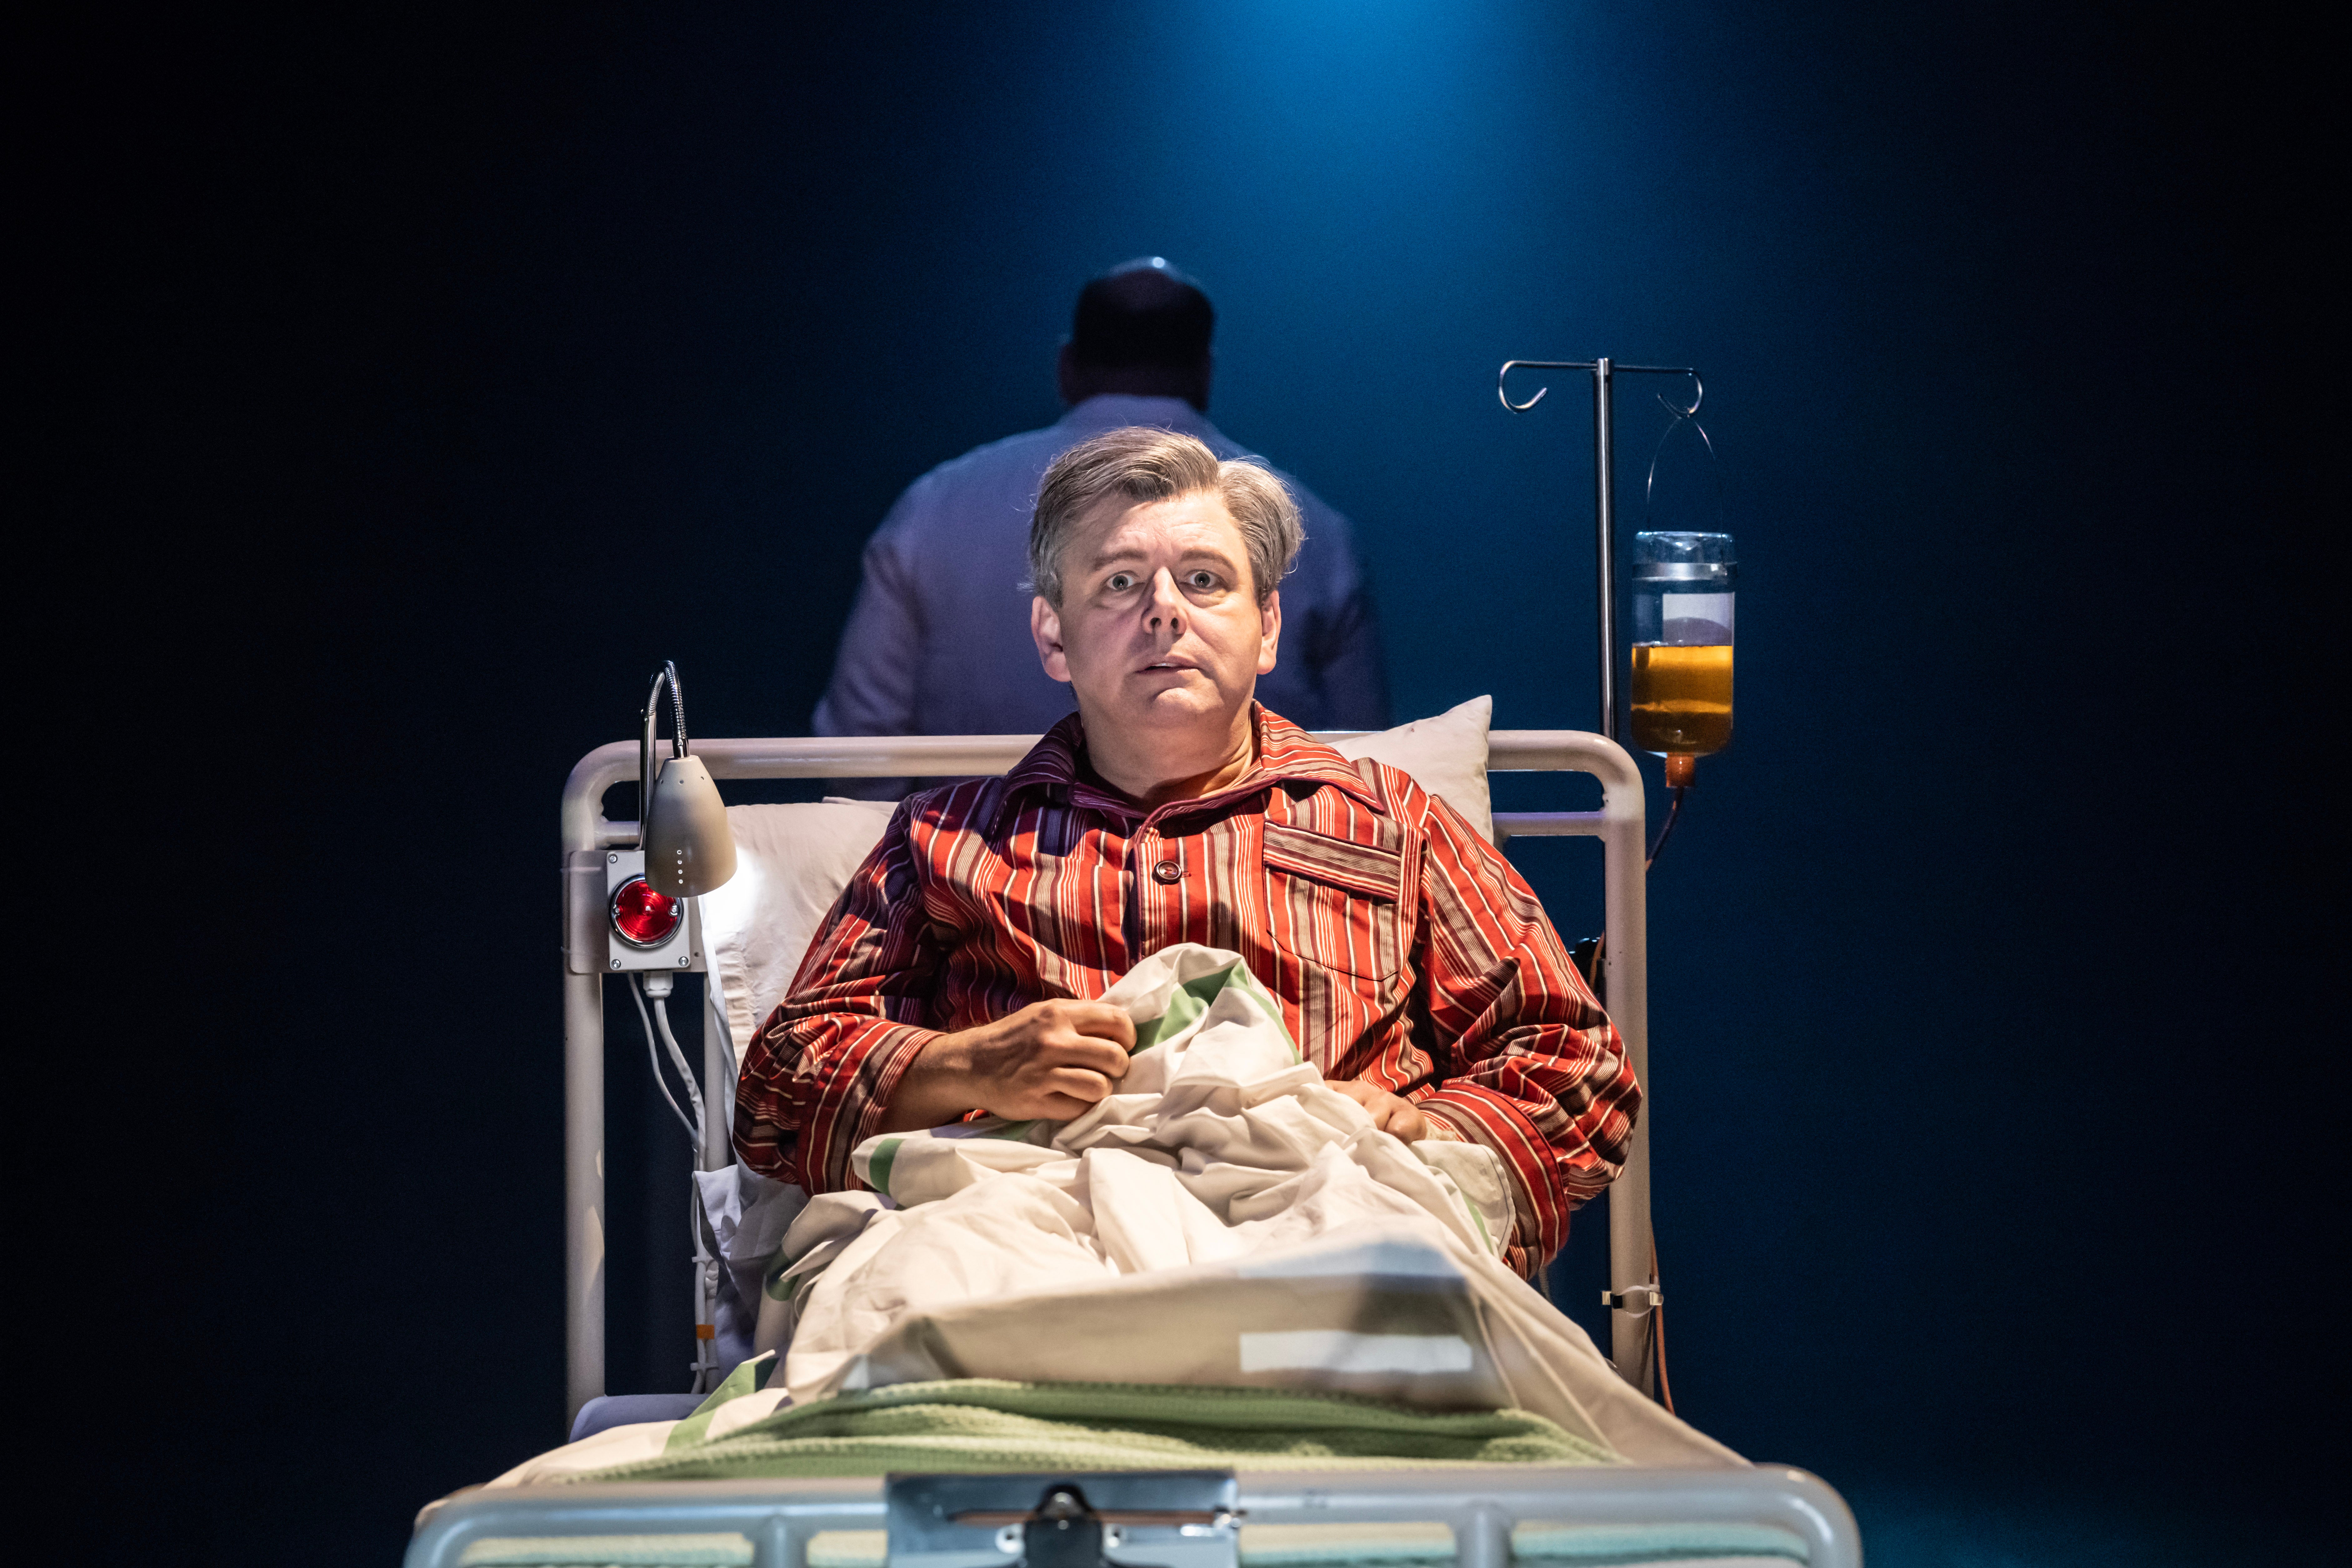 Michael Sheen as Aneurin ‘Nye’ Bevan in ‘Nye’ at the National Theatre